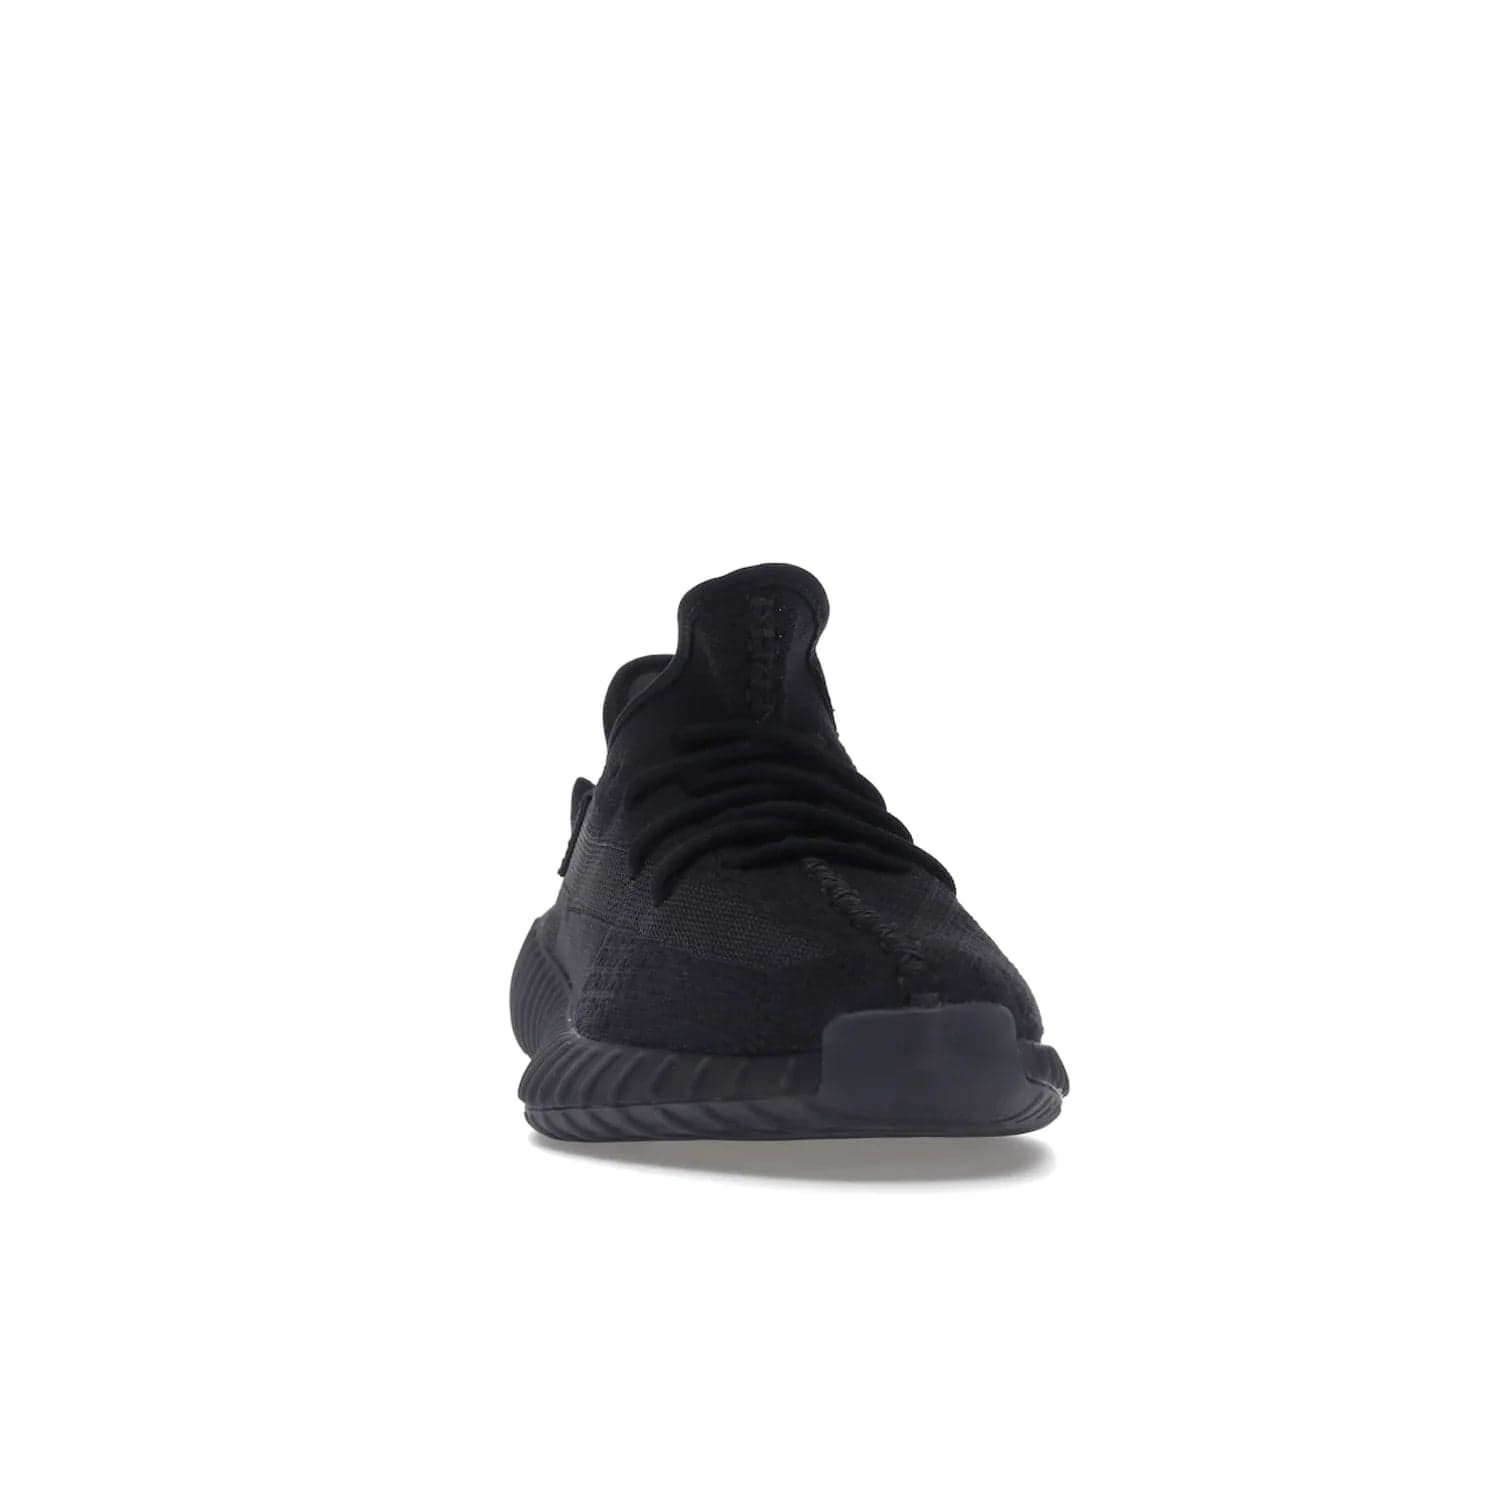 adidas Yeezy Boost 350 V2 Onyx - Image 9 - Only at www.BallersClubKickz.com - Adidas Yeezy Boost 350 V2 Onyx Triple Black shoes for comfort and style. Arriving Spring 2022.